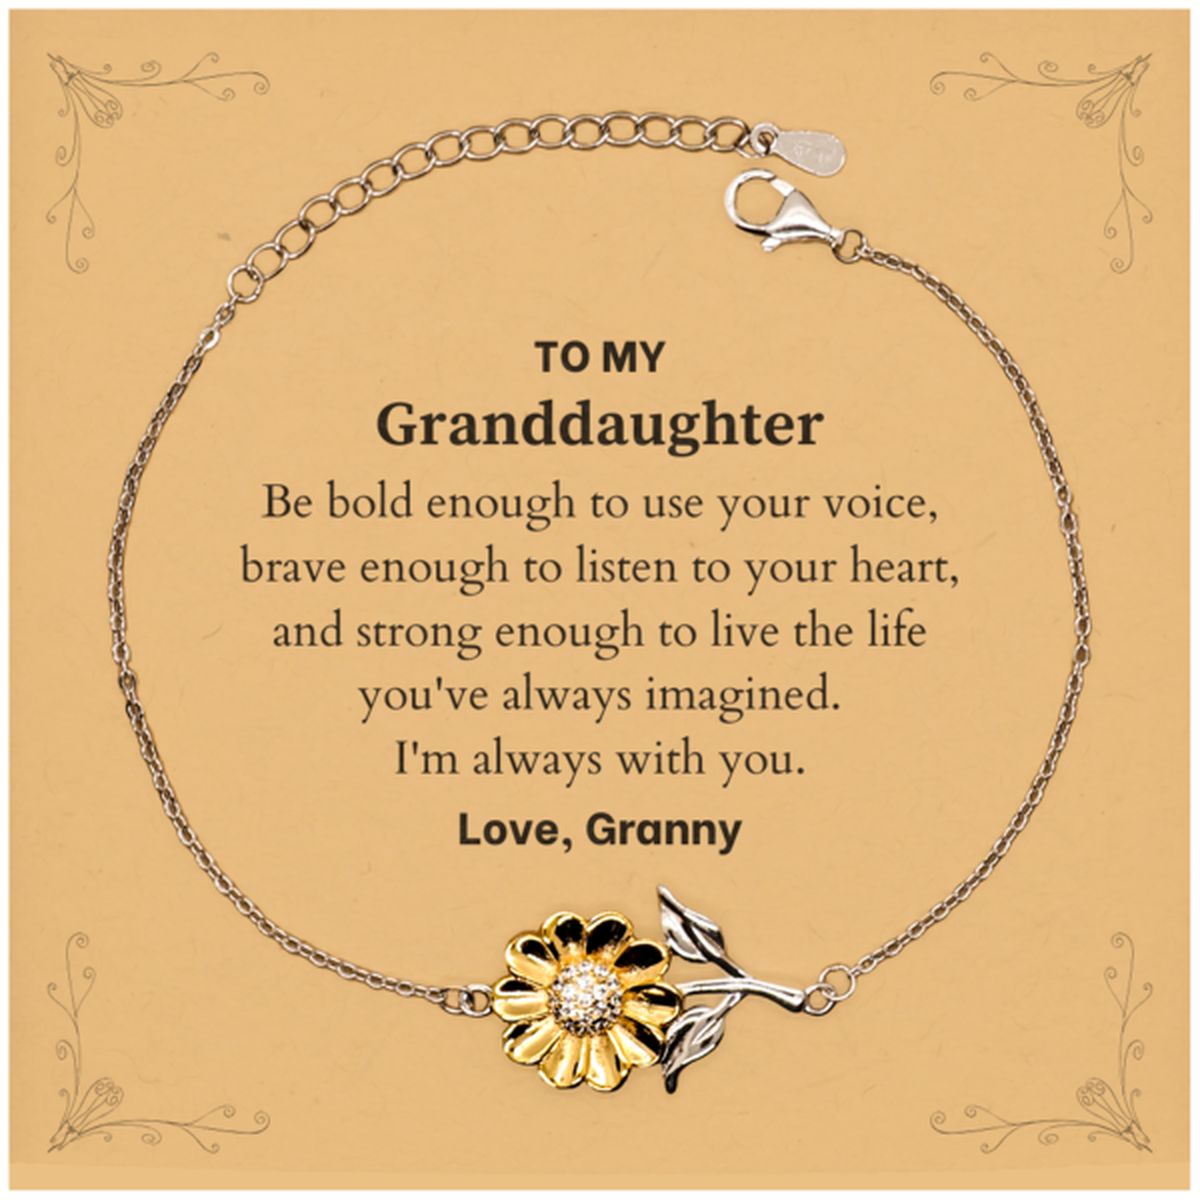 Keepsake Granddaughter Sunflower Bracelet Gift Idea Graduation Christmas Birthday Granddaughter from Granny, Granddaughter Be bold enough to use your voice, brave enough to listen to your heart. Love, Granny